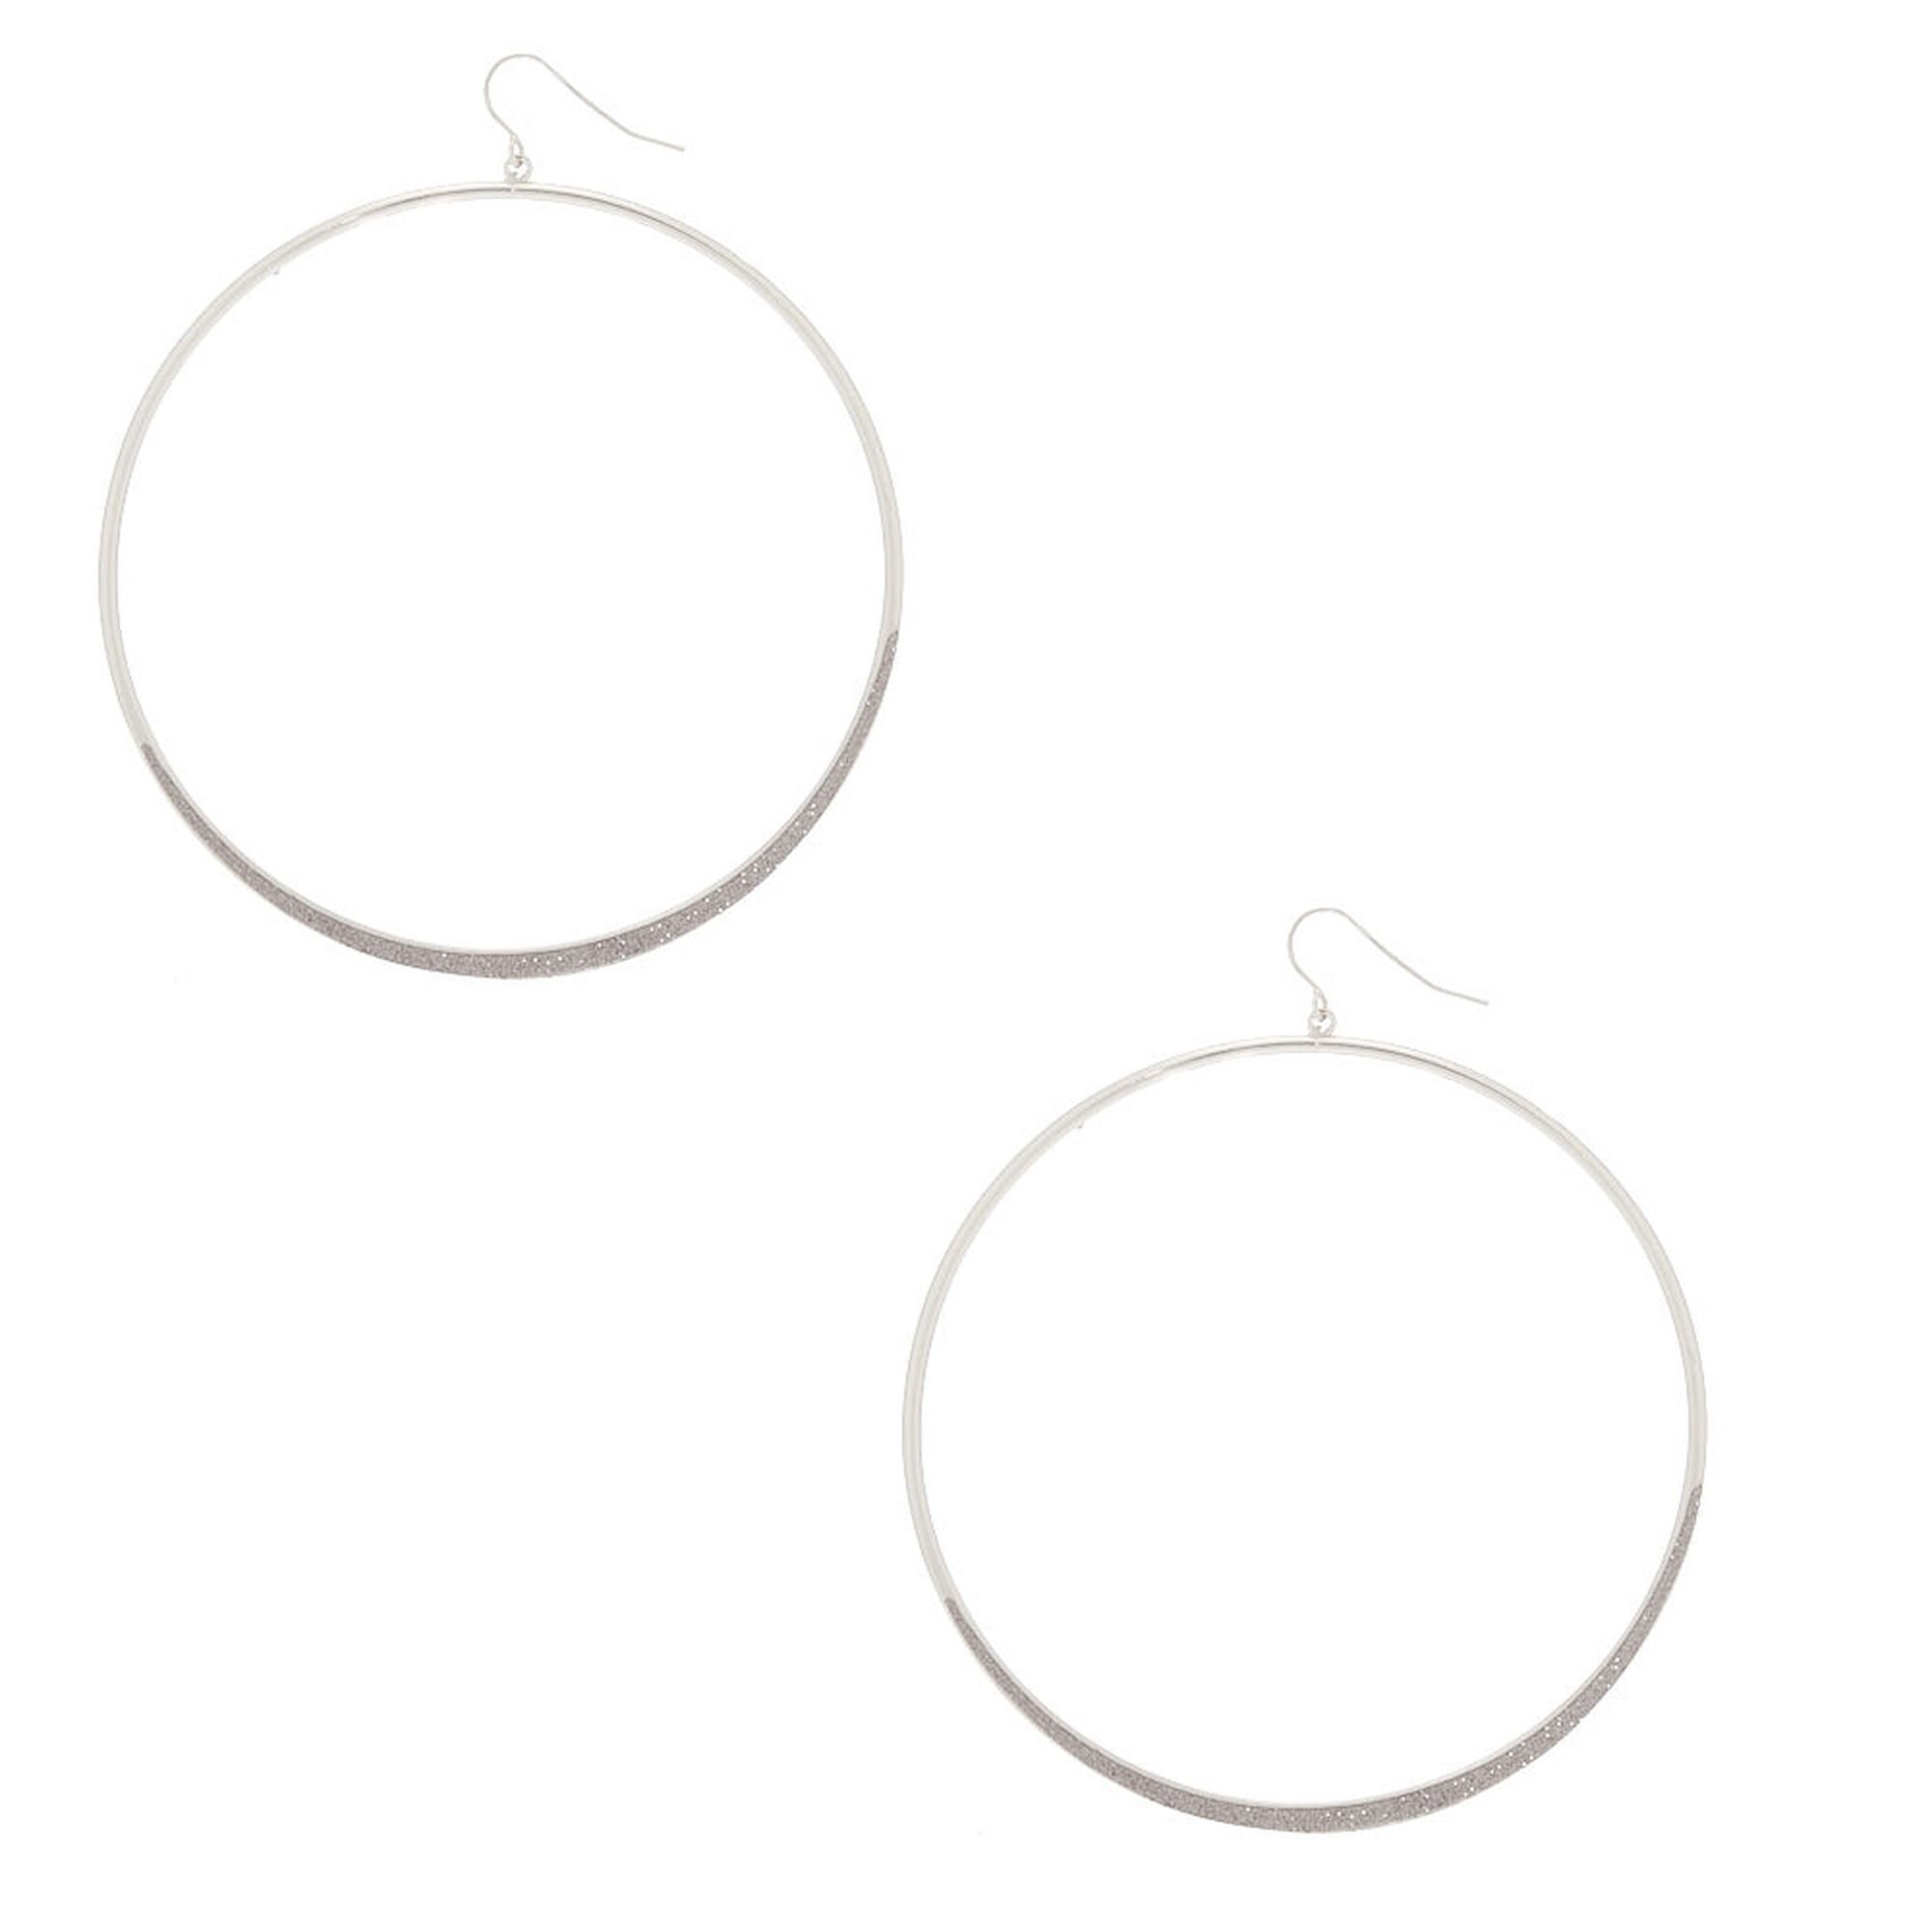 View Claires Tone 3 Glitter Large Hoop Drop Earrings Silver information